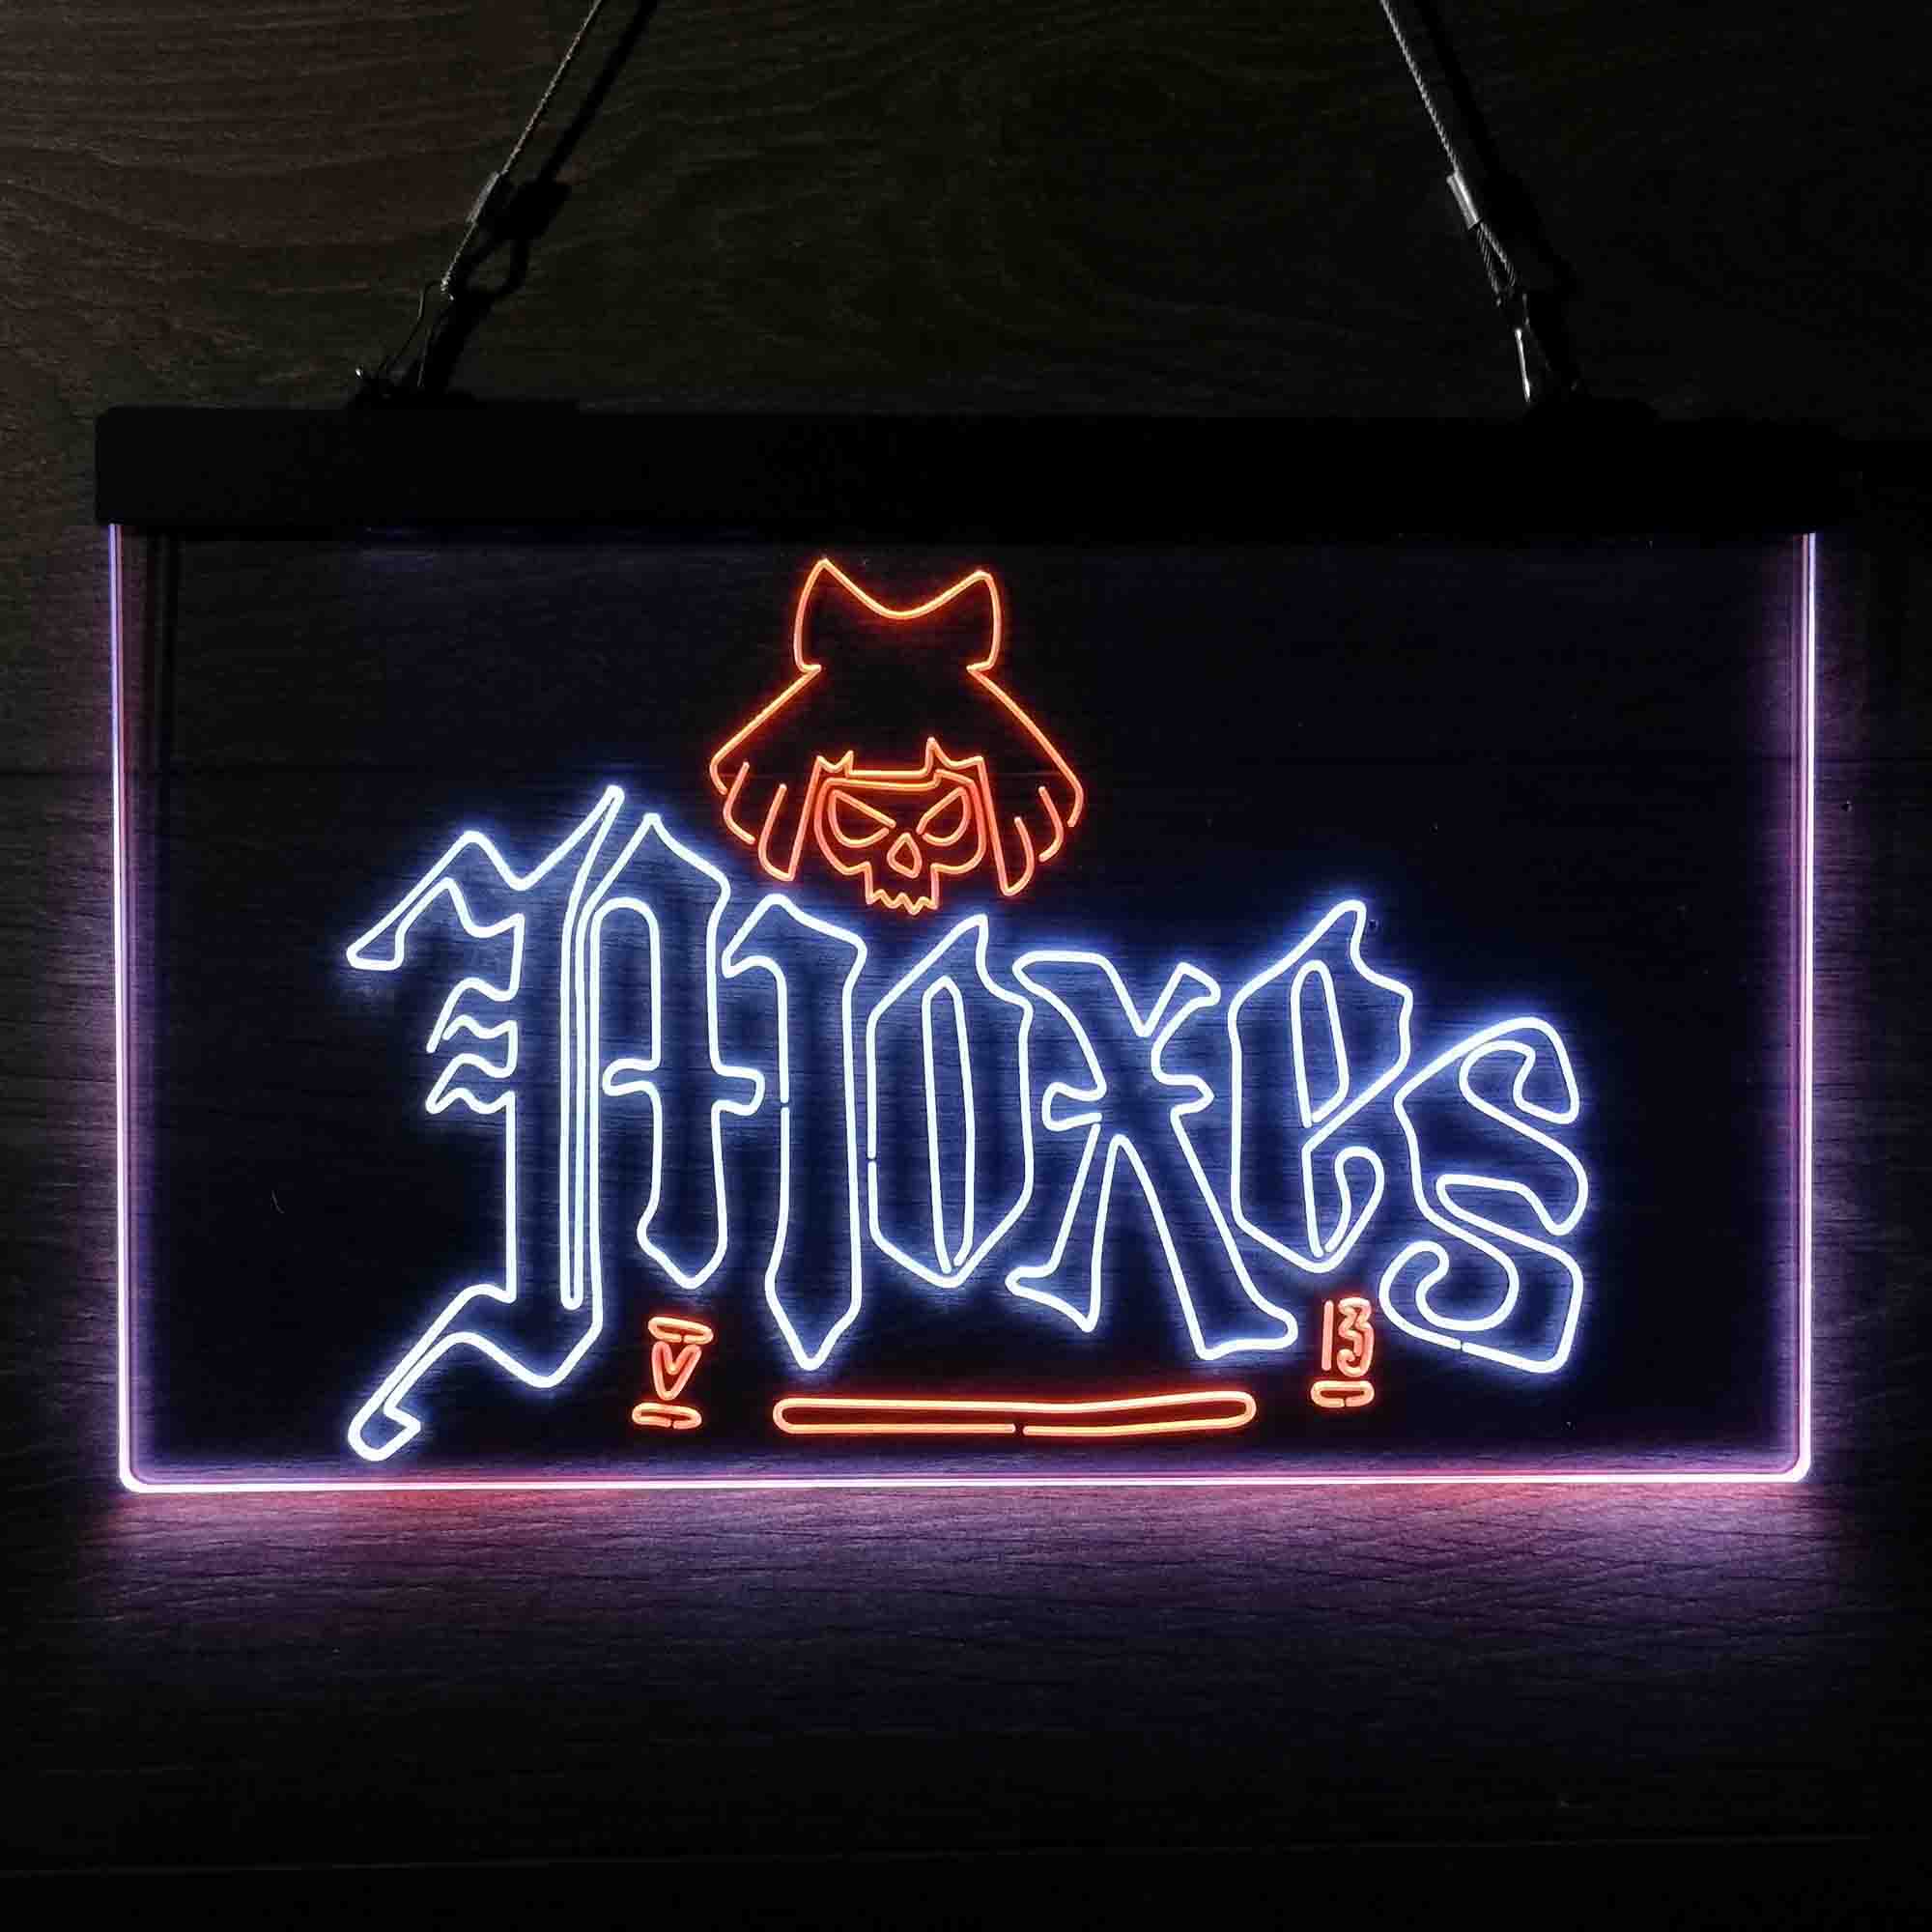 Cyberpunk 2077 Moxes Game Room Neon Light LED Sign